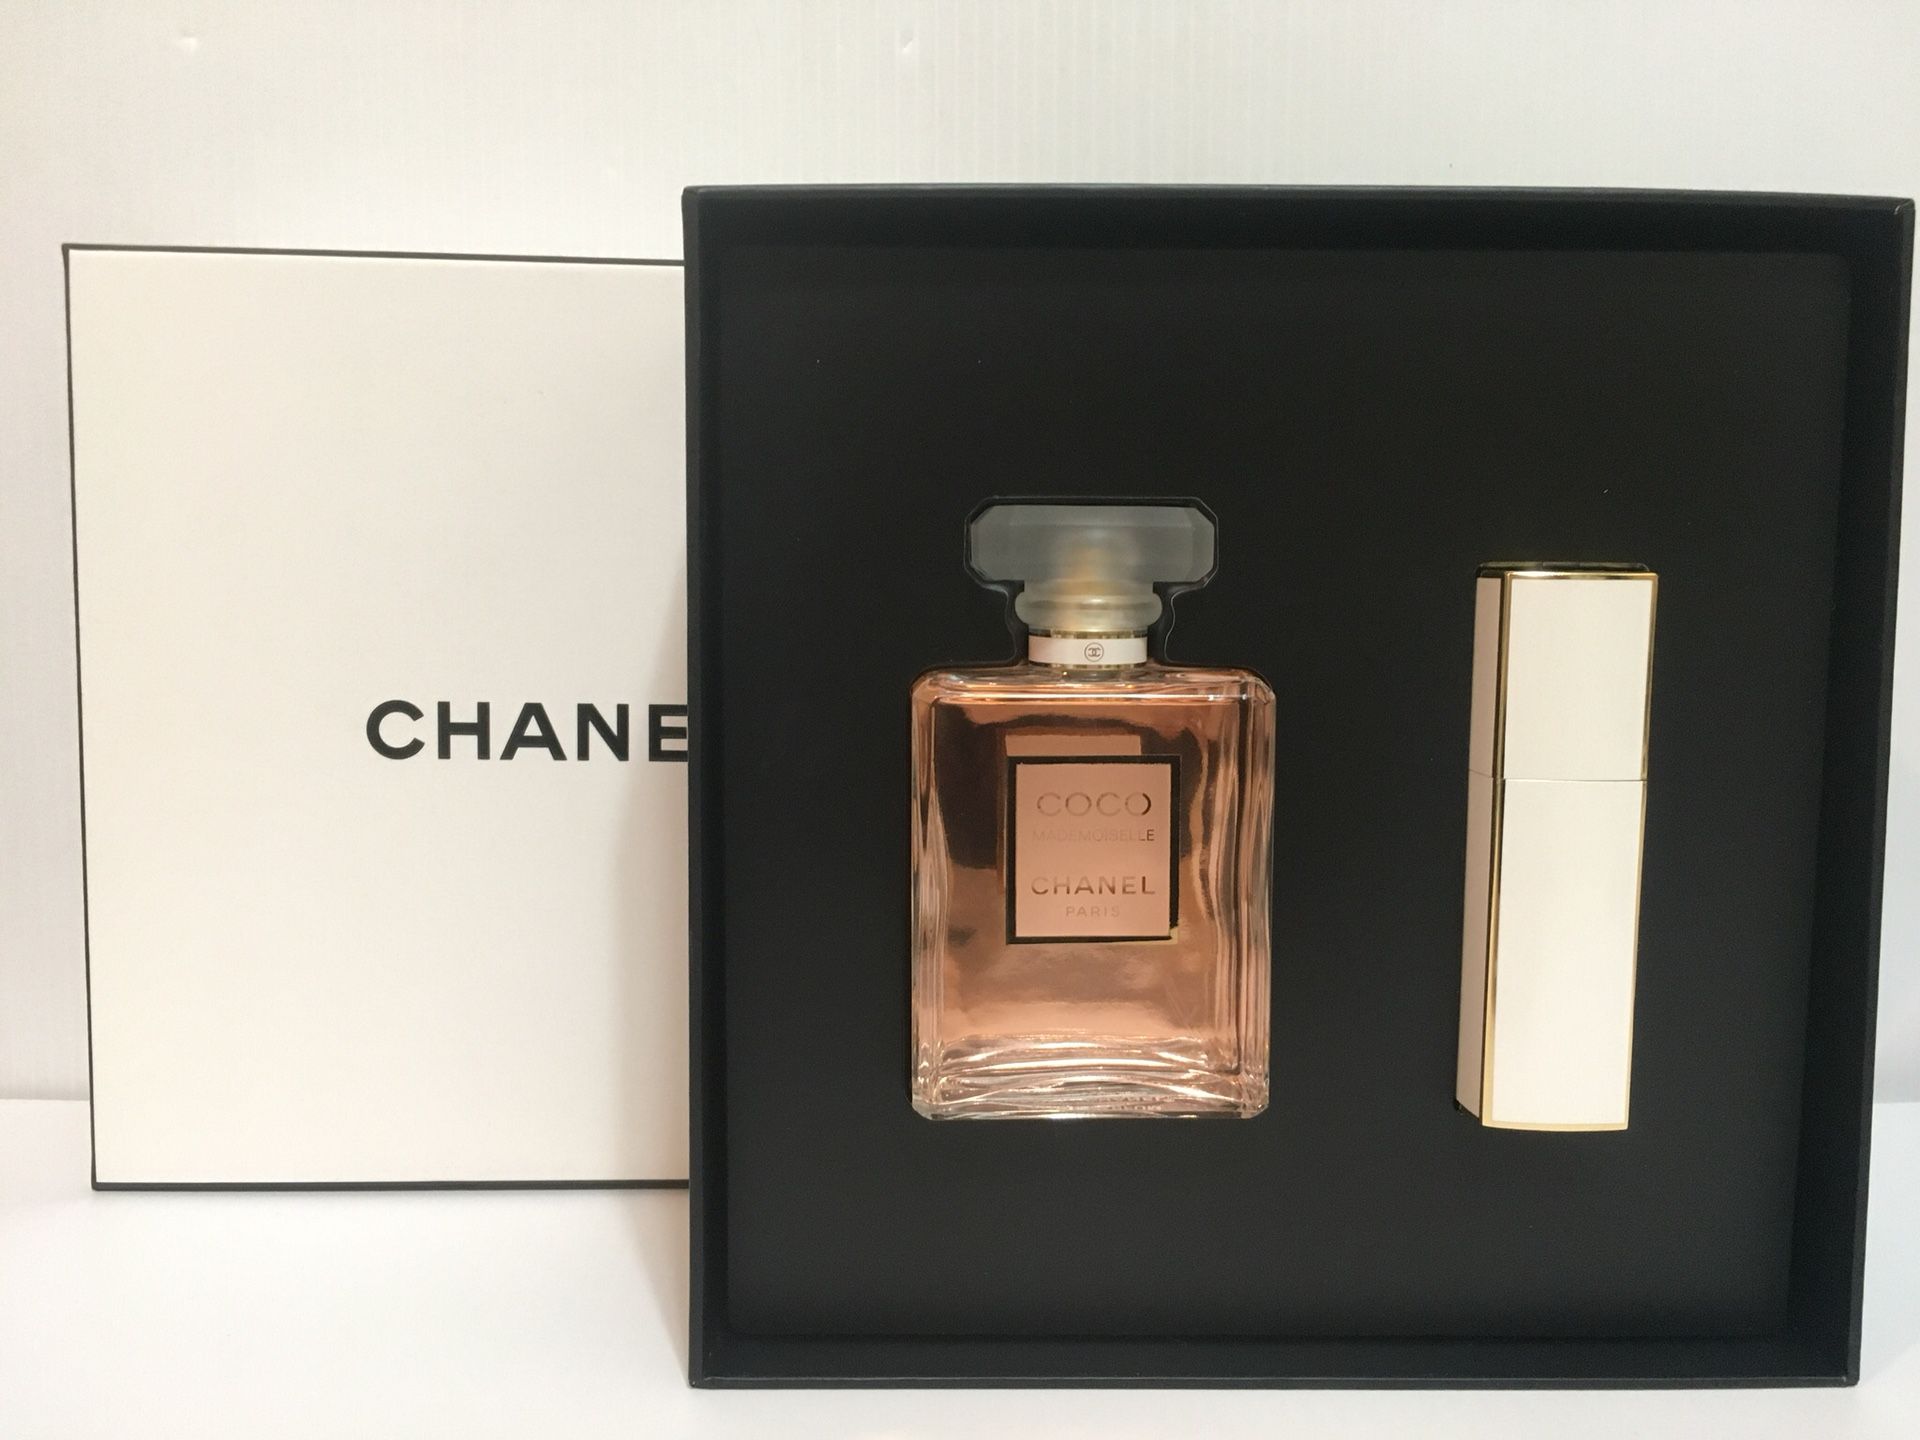 COCO MADEMOISELLE BY CHANEL PERFUME FOR WOMEN SPRAY 2PC GIFT SET  OZ +   OZ NEW IN BOX for Sale in Arlington, TX - OfferUp